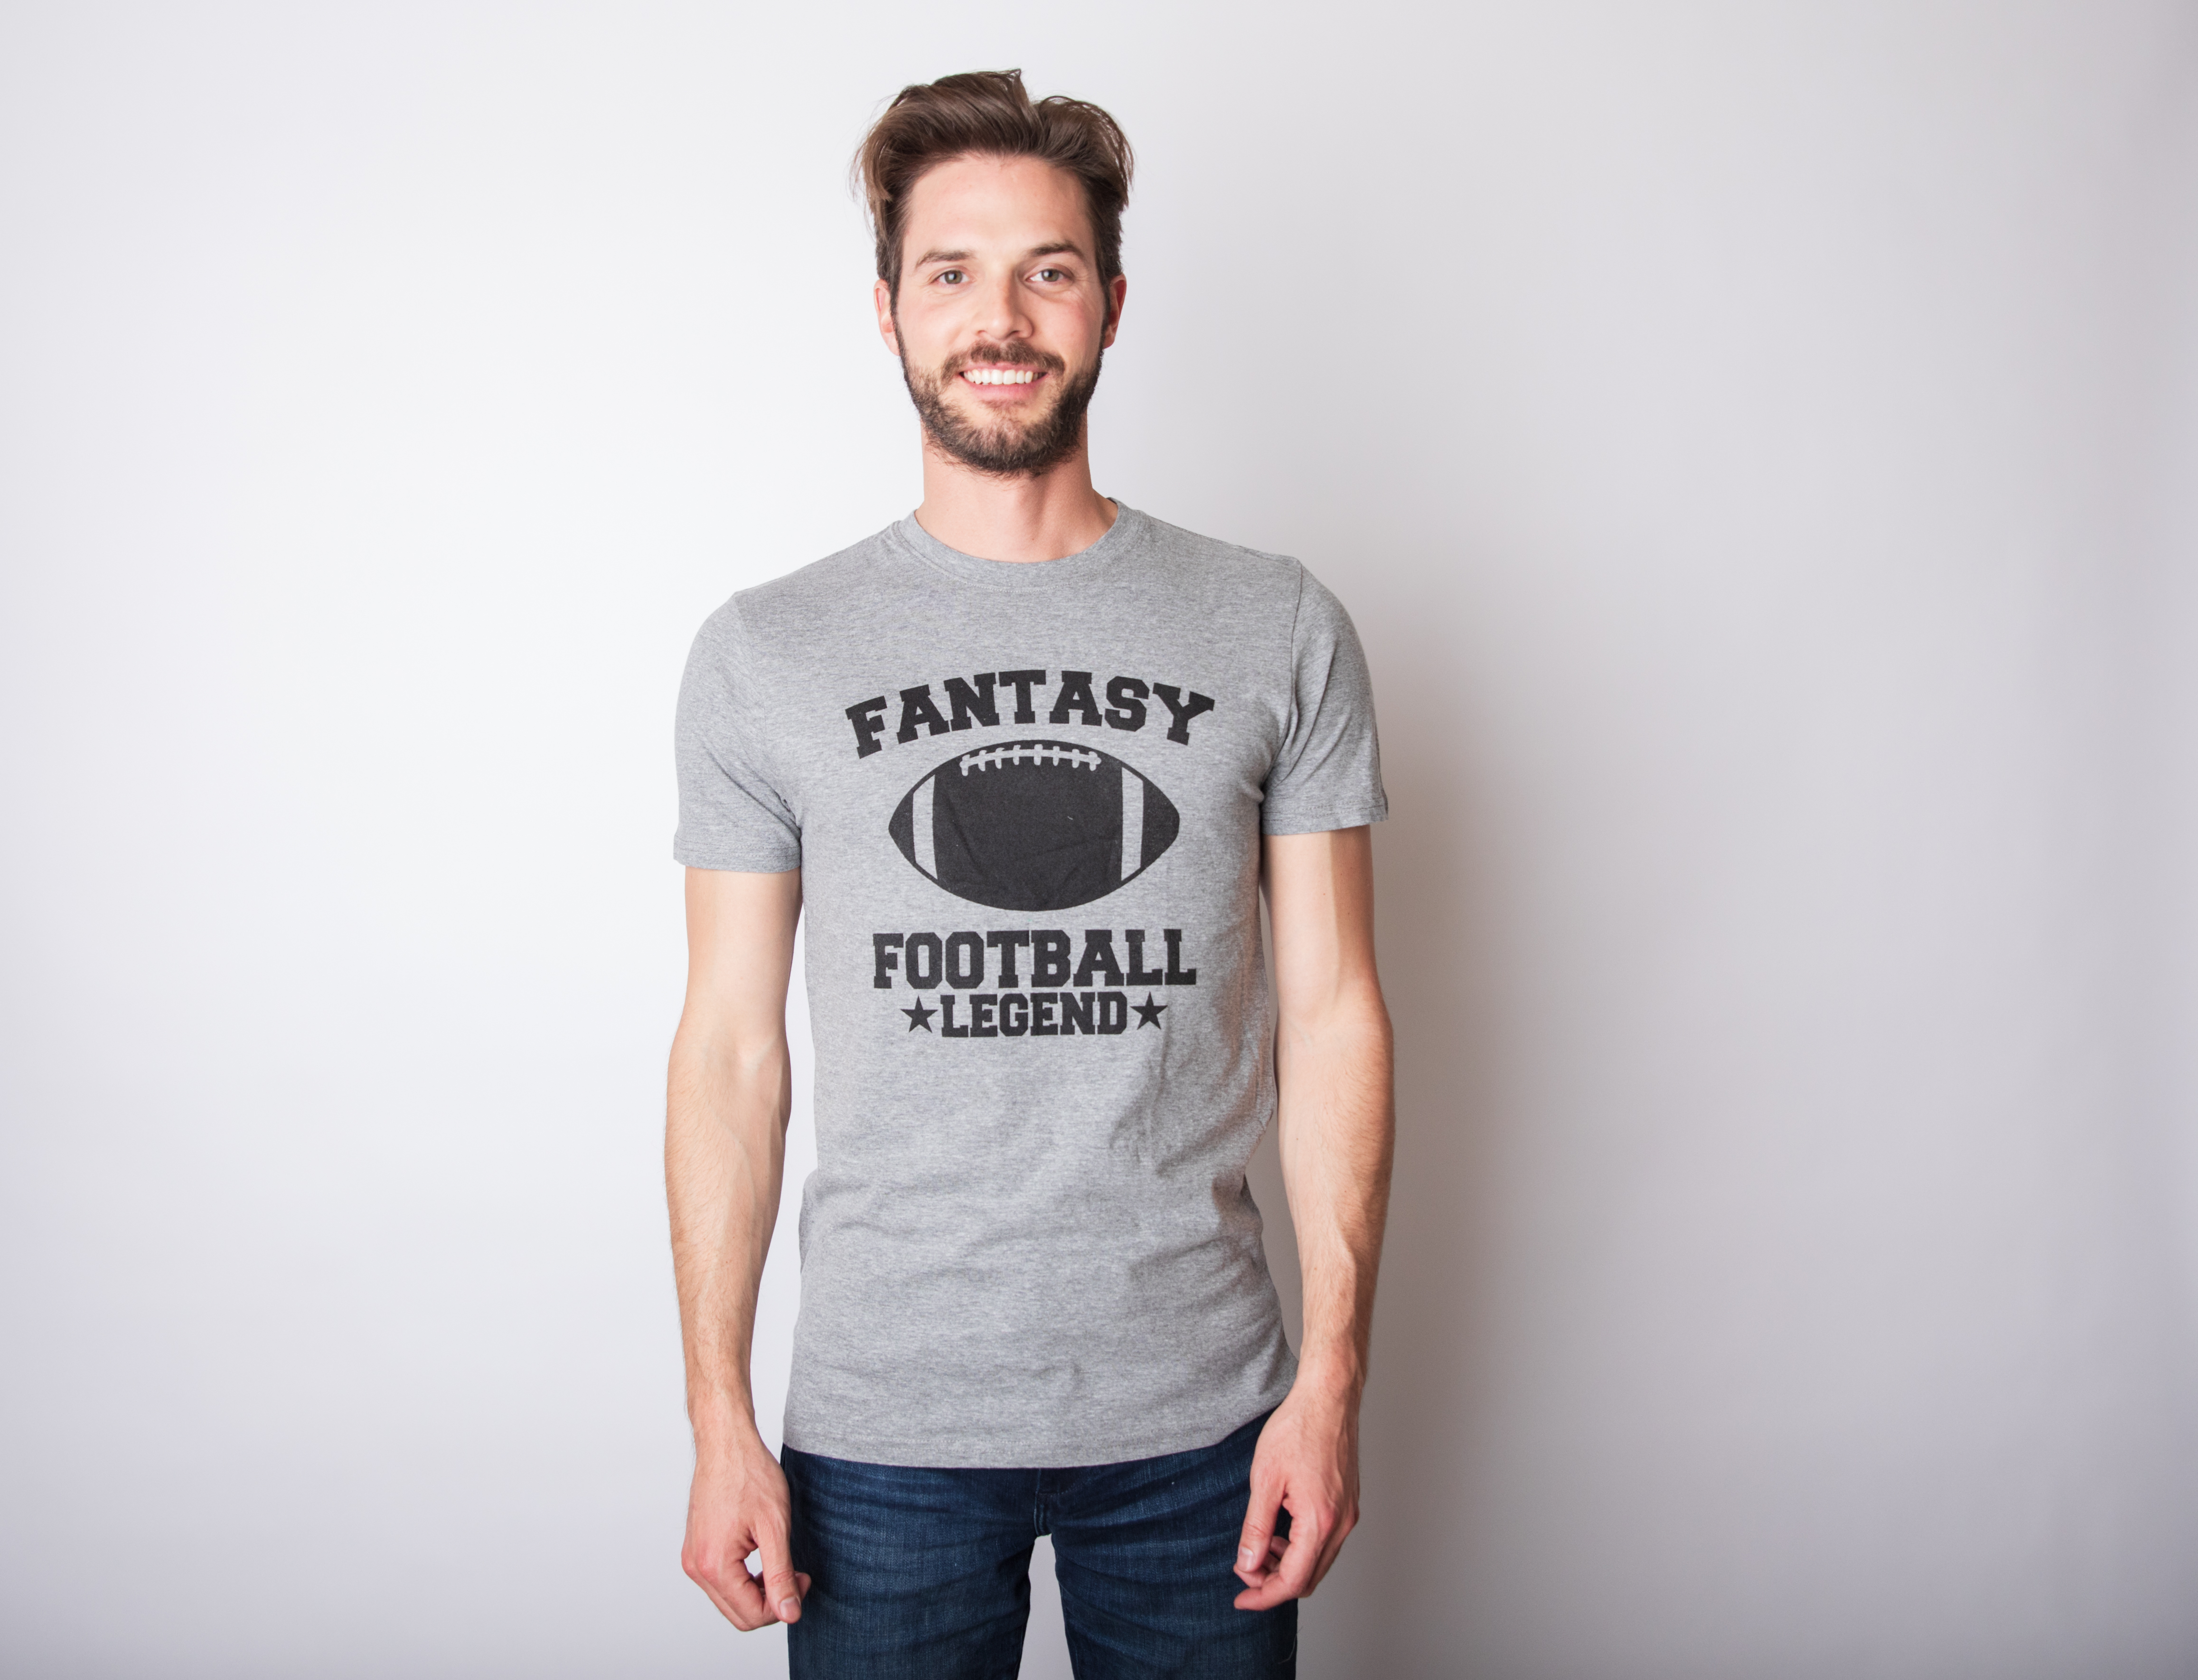 Mens Fantasy Football Legend Funny T shirt Season Novelty Graphic Dad Gameday Graphic Tees - image 2 of 10